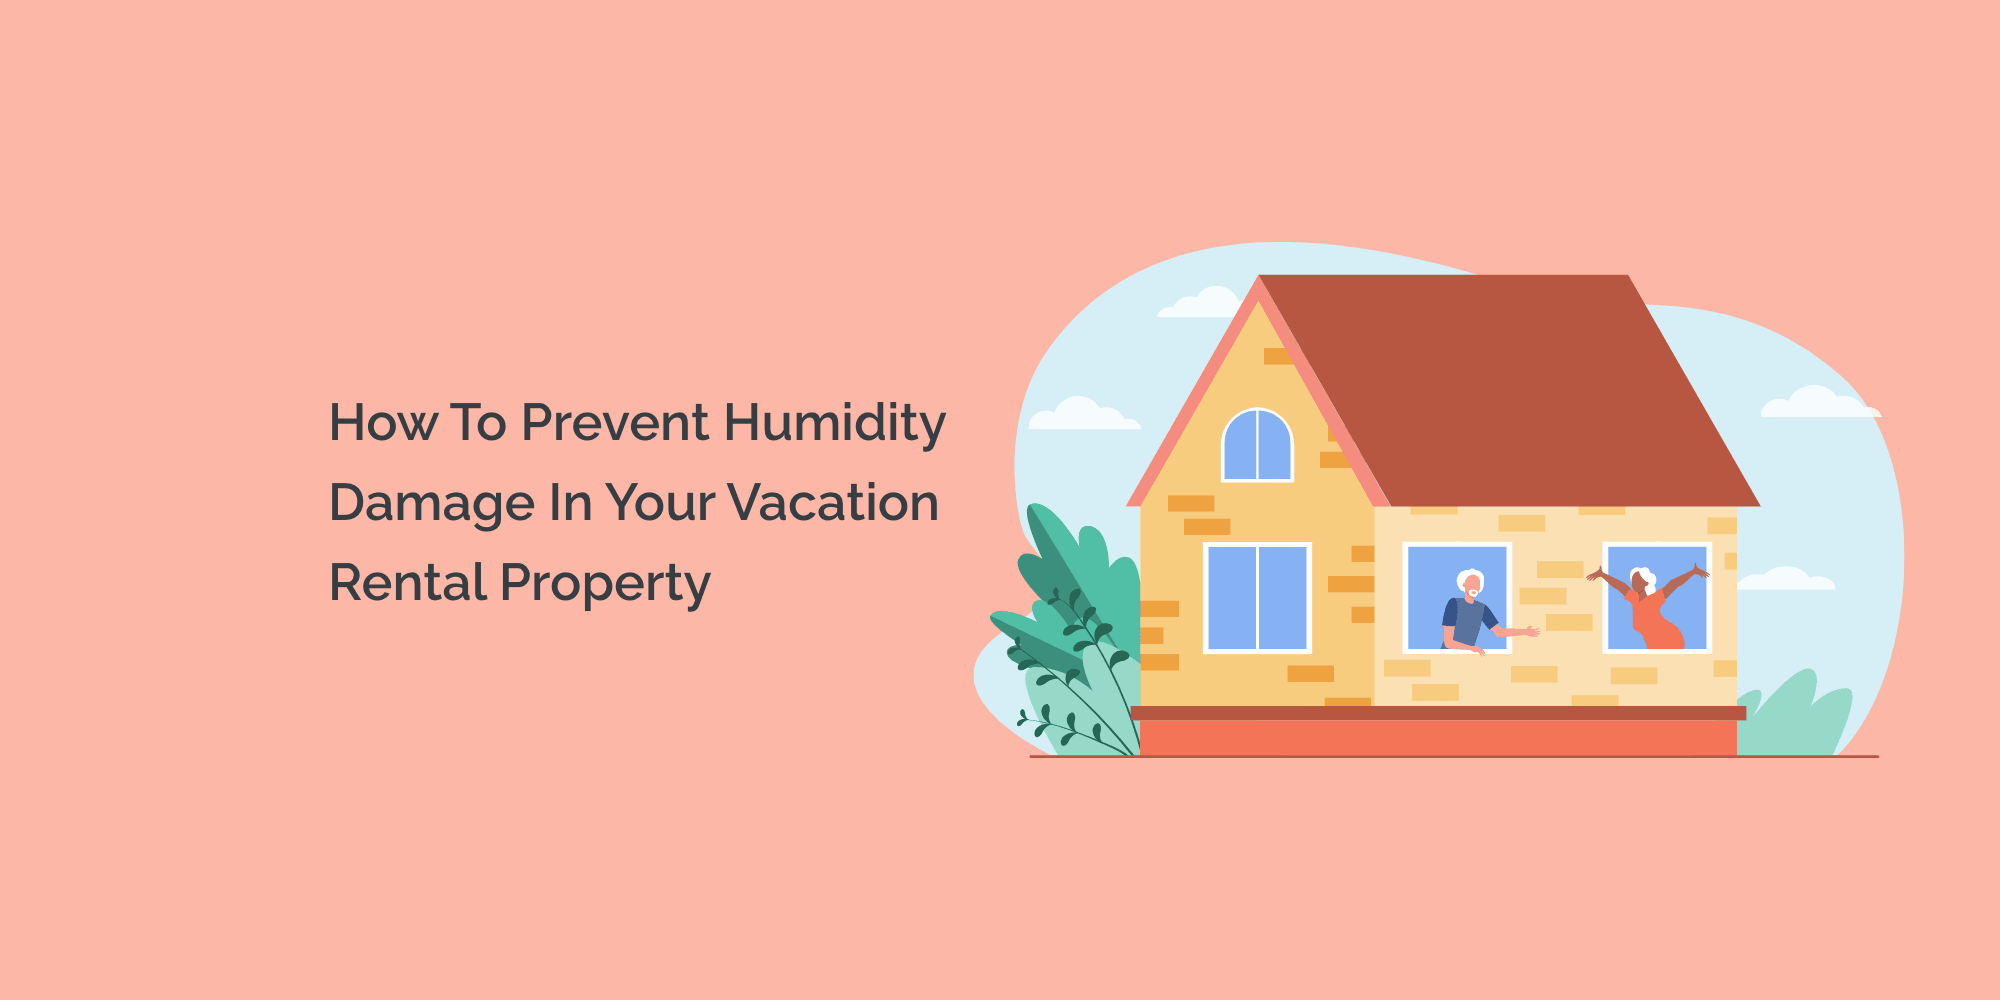 How to Prevent Humidity Damage in Your Vacation Rental Property